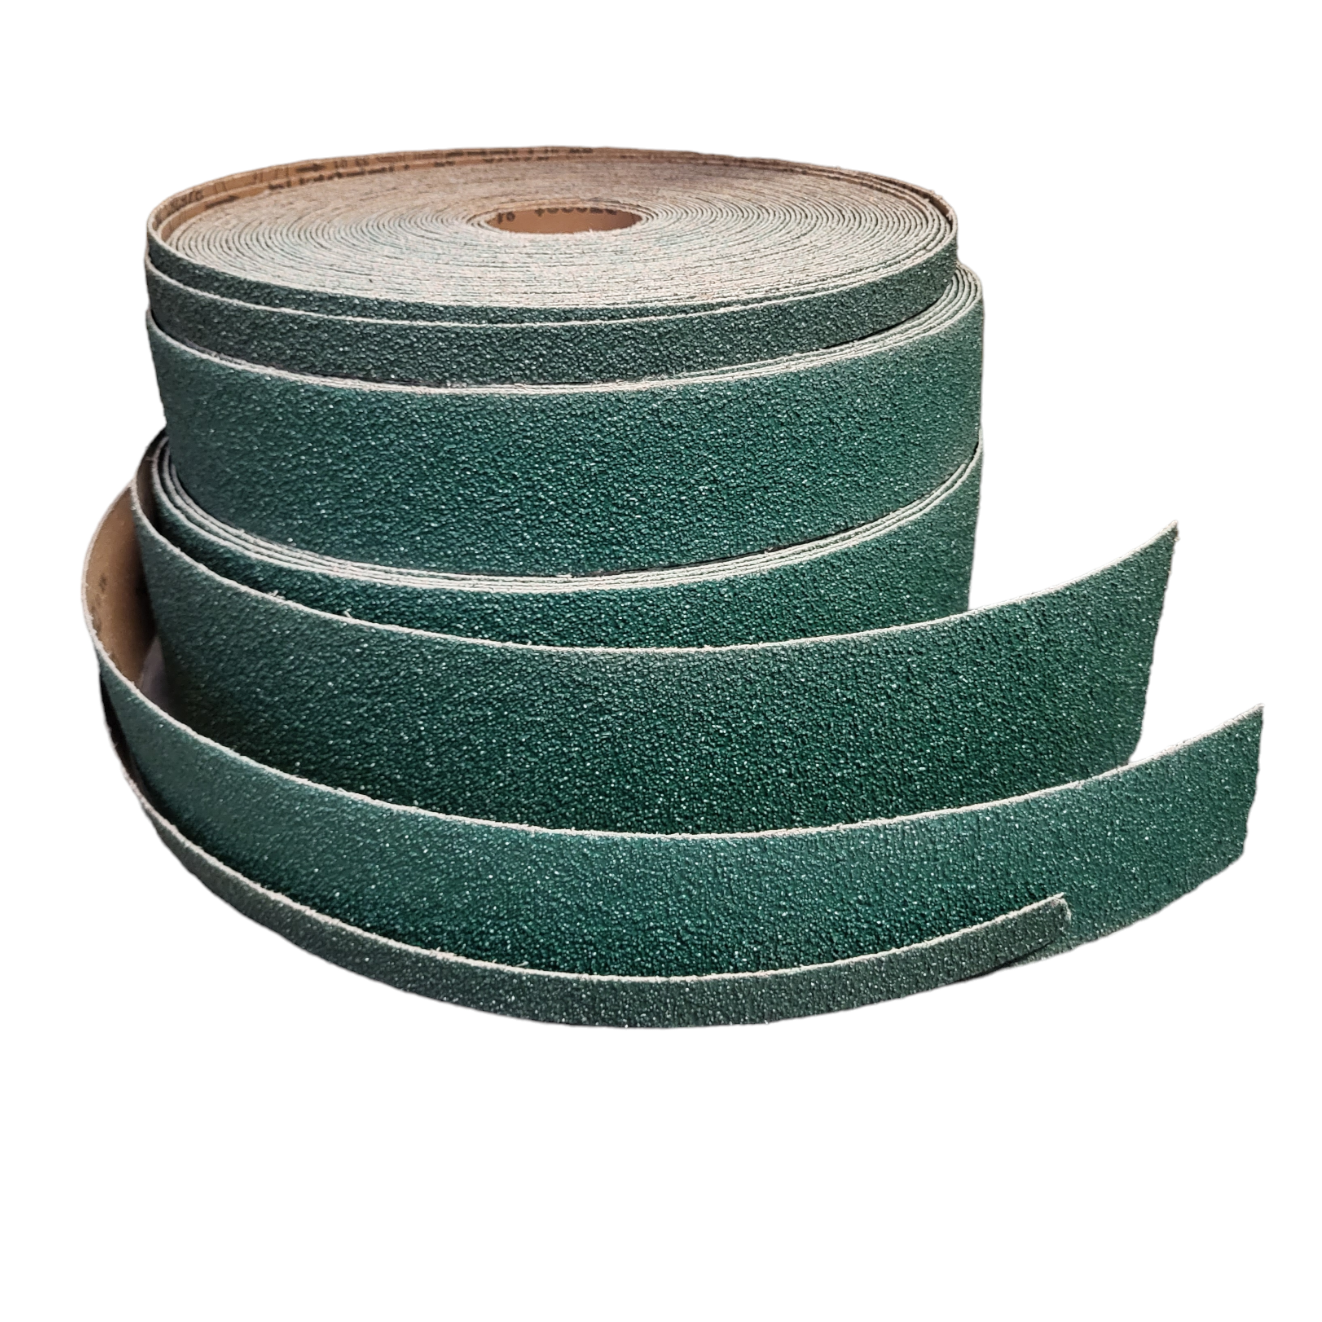 Sanding Paper, Grit Size and Width: Grit 24 / 20mm Width Size